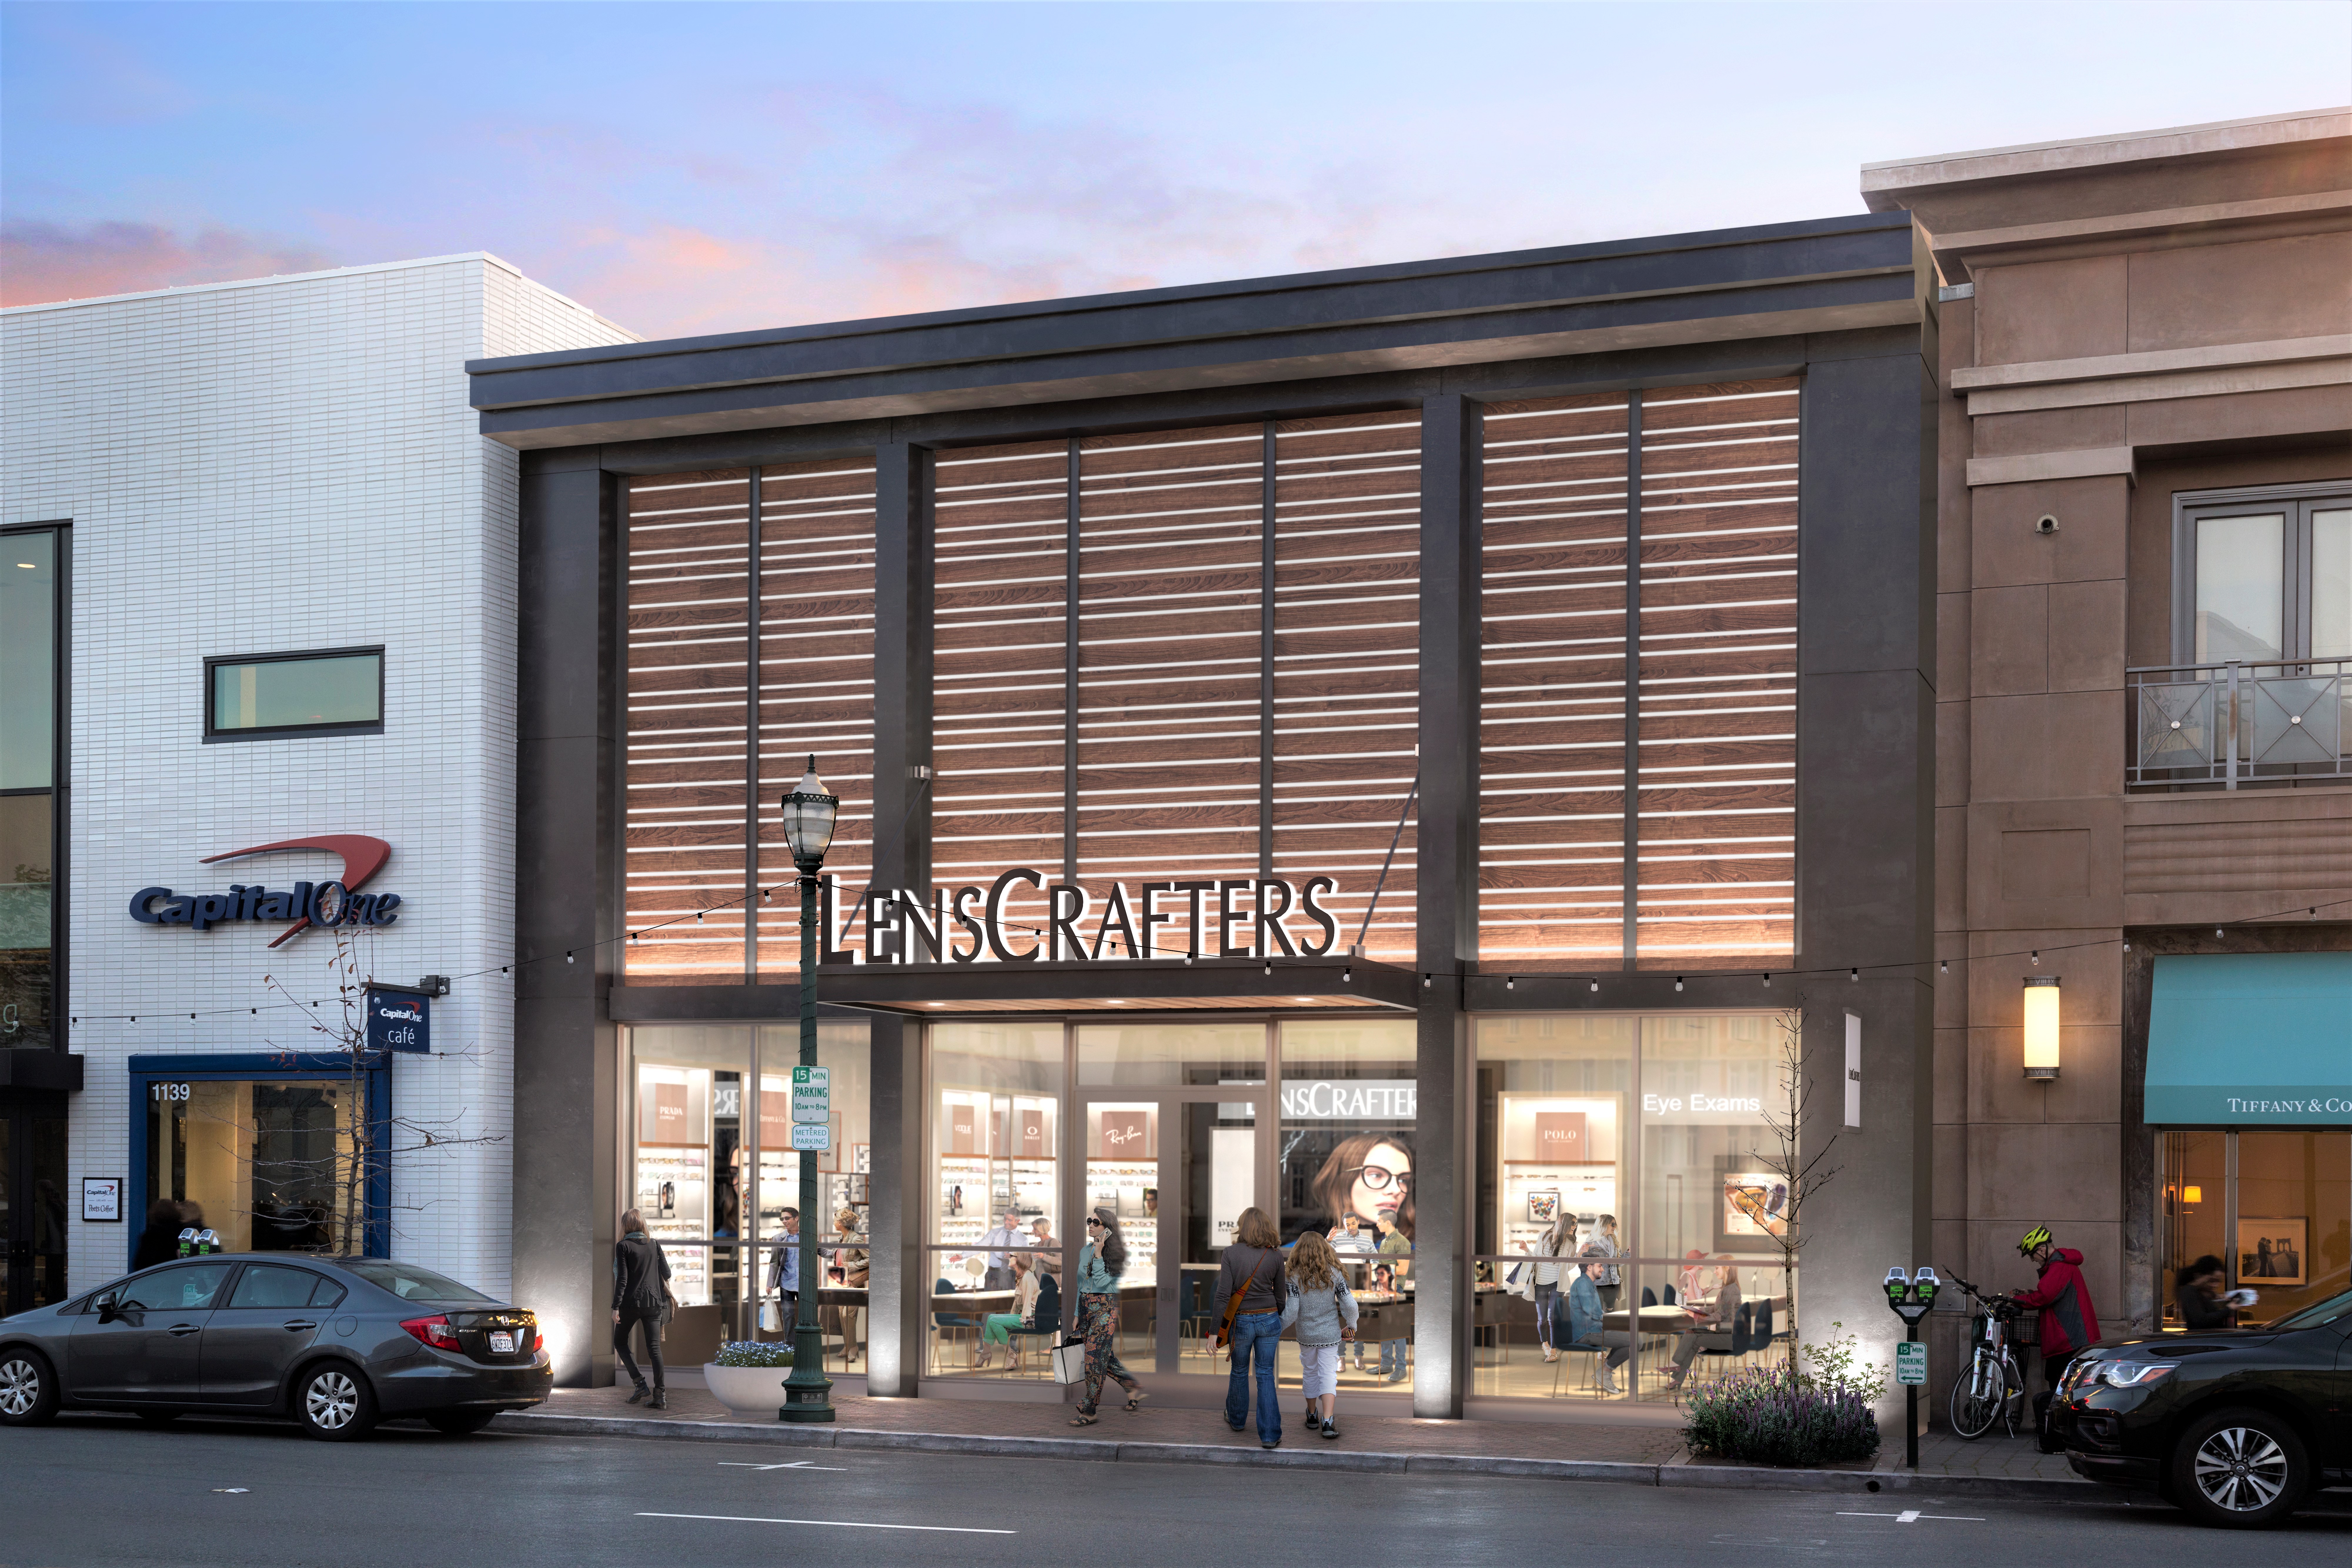 Lucky Brand Closes at Broadway Plaza in Walnut Creek – Beyond the Creek